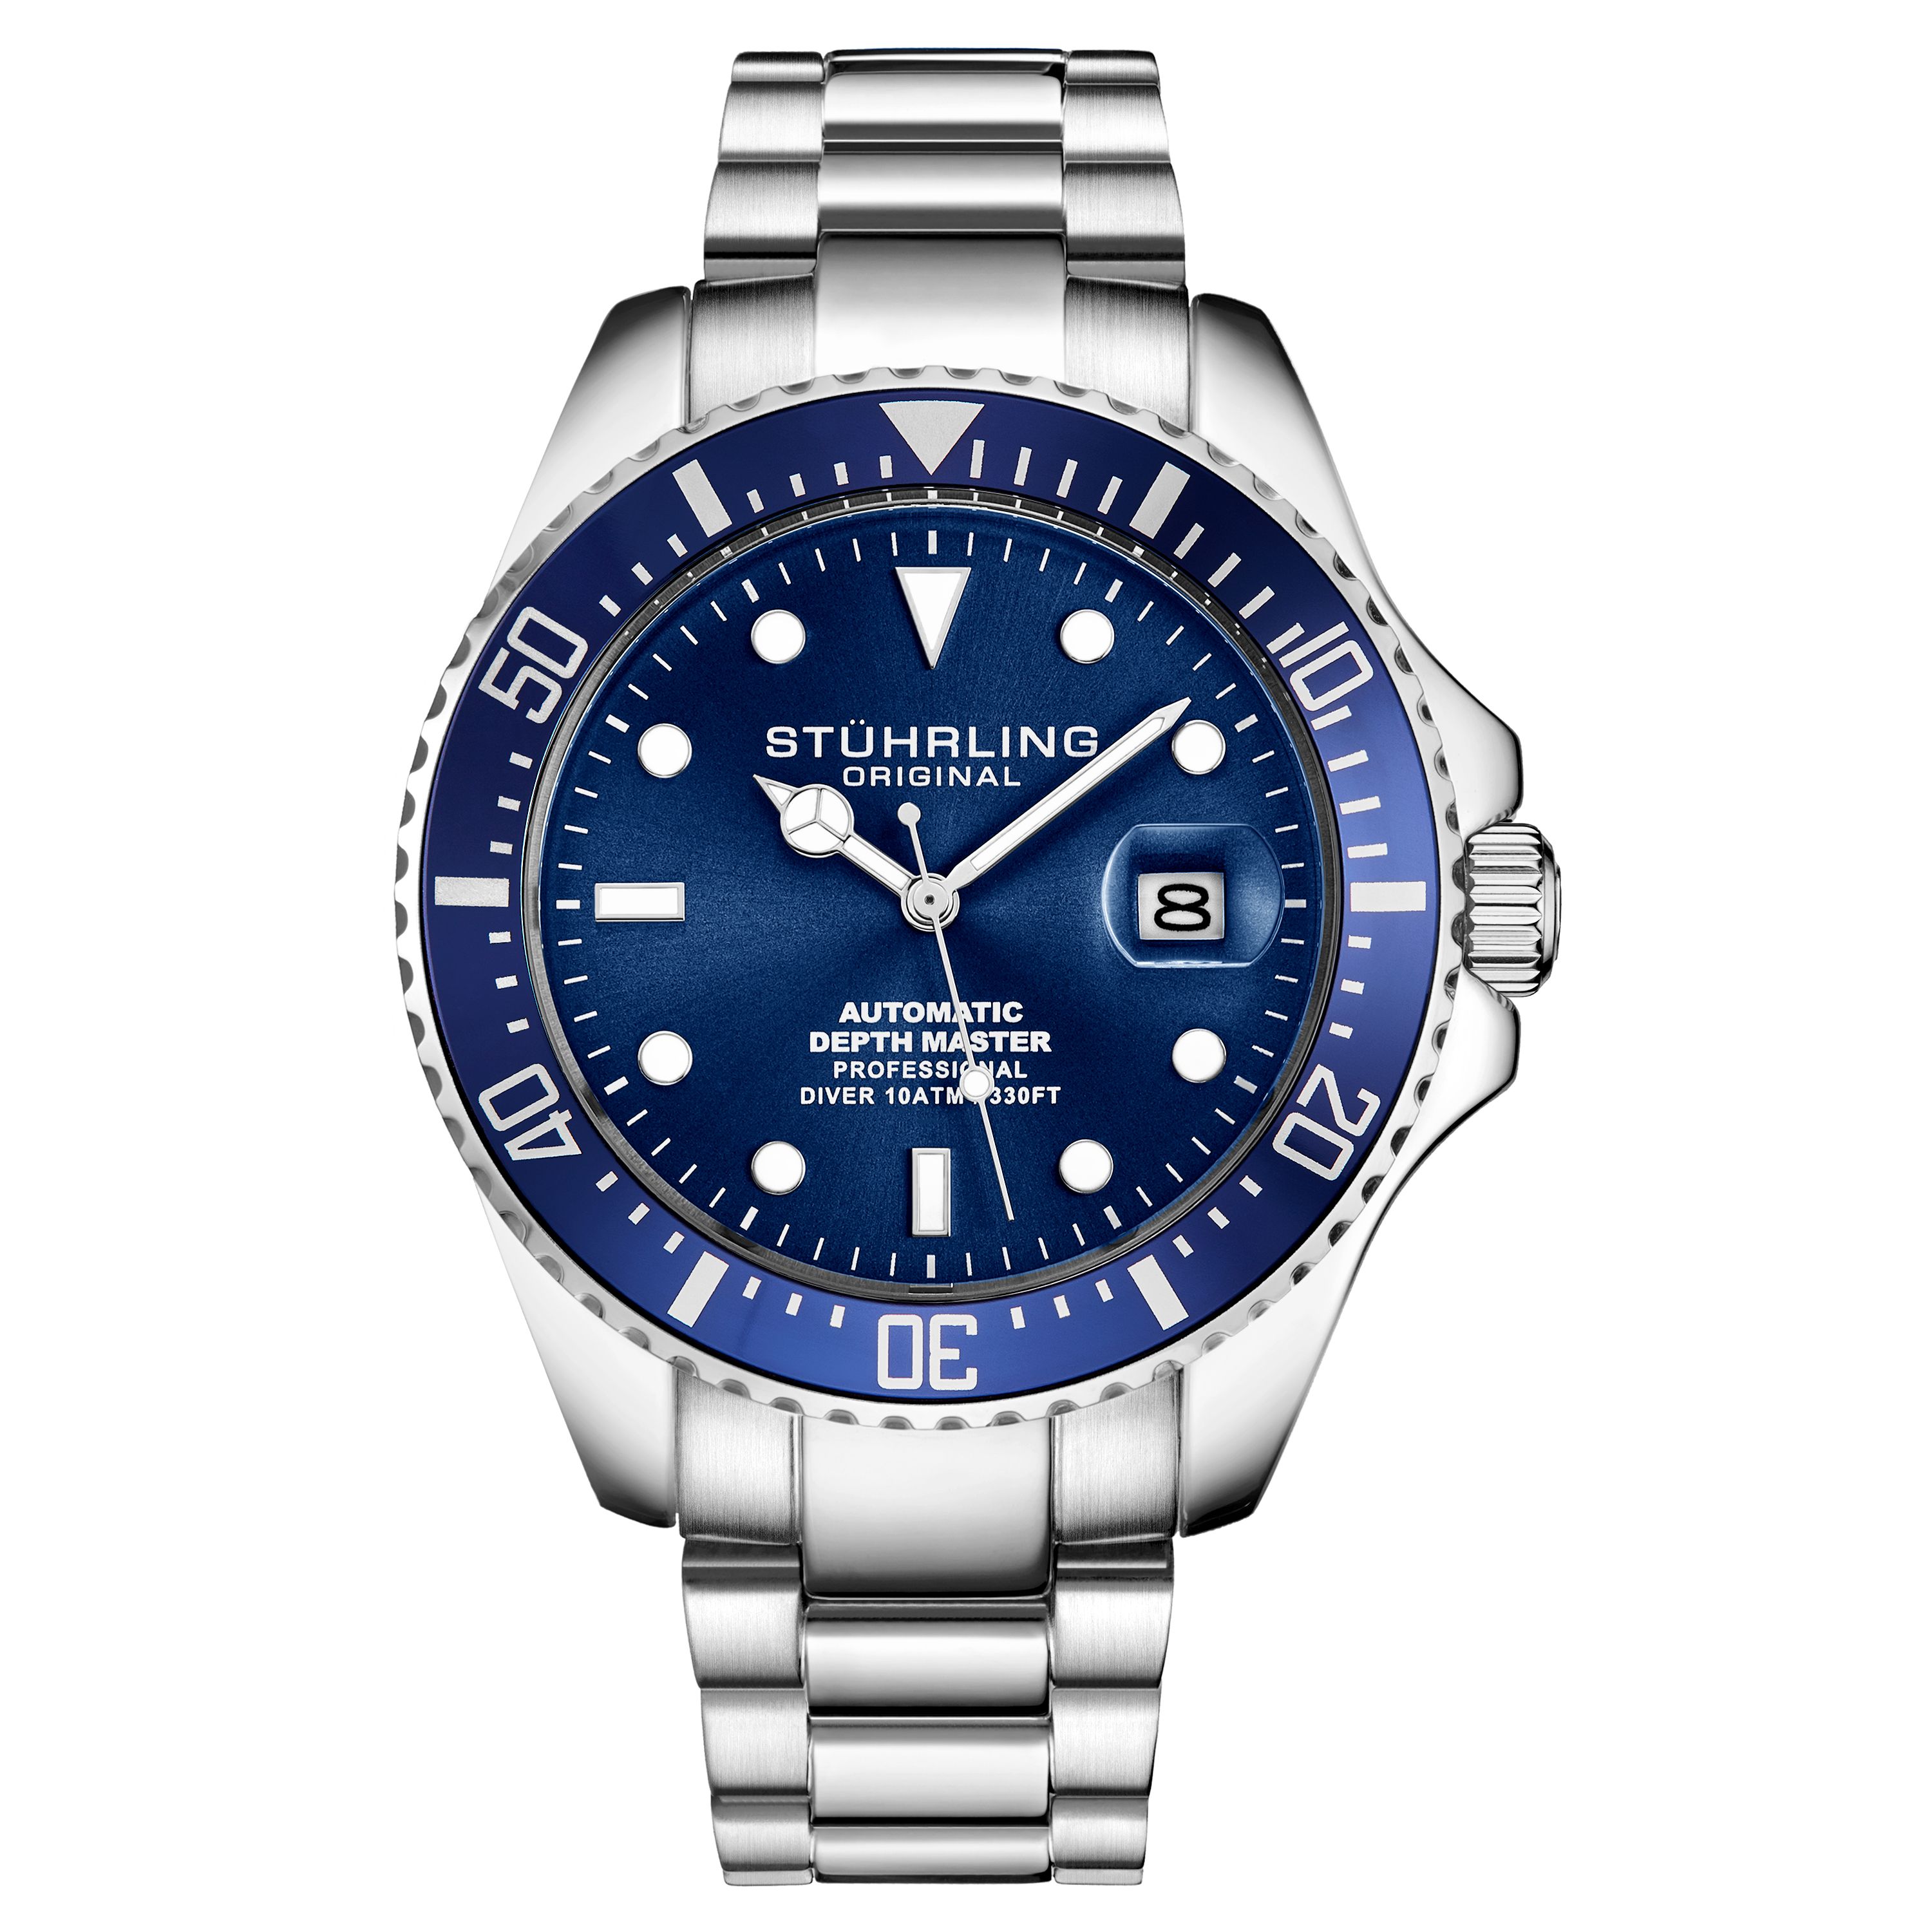 Men's Automatic Diver Watch, Silver Case, Blue Dial, Silver Stainless Steel Bracelet